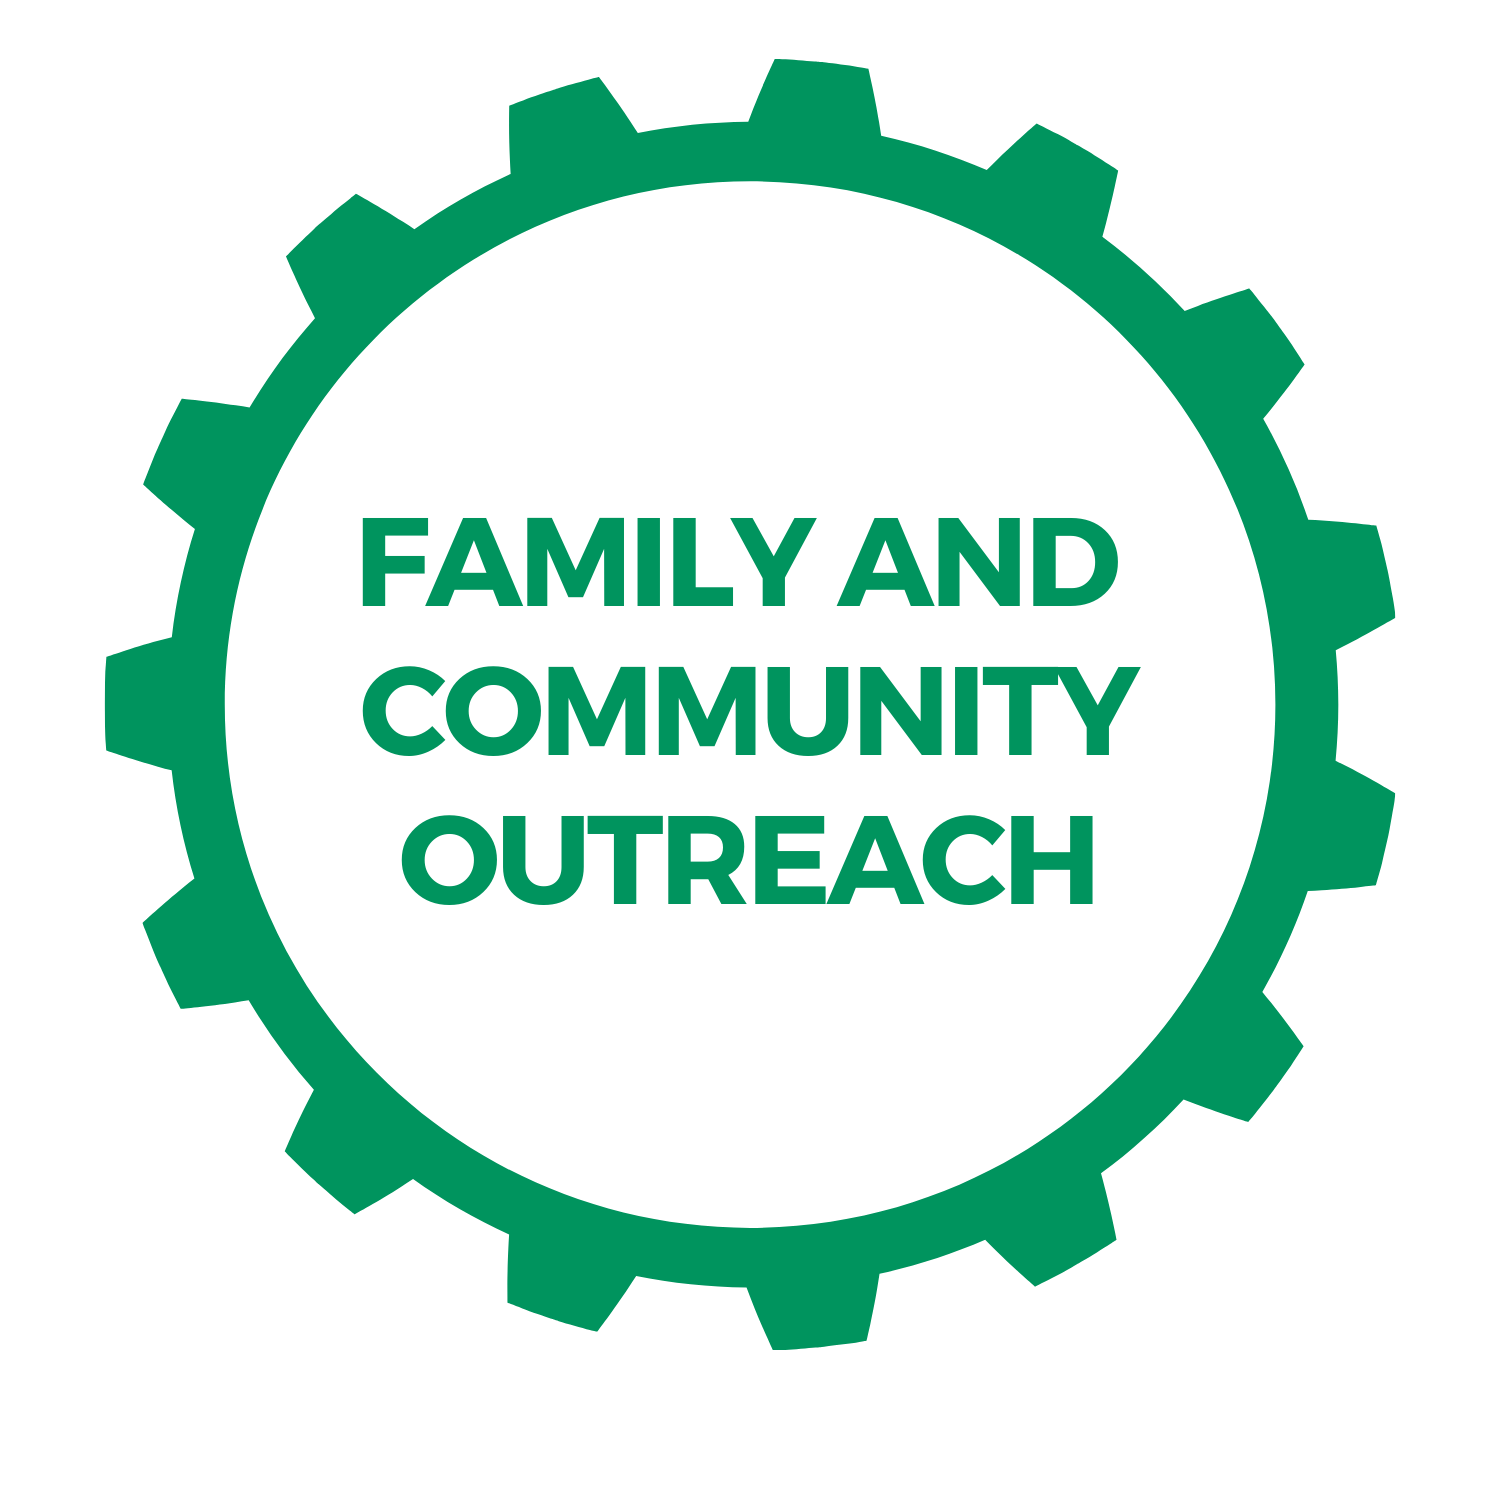  Image of a green gear with Family and Community Outreach written on it 